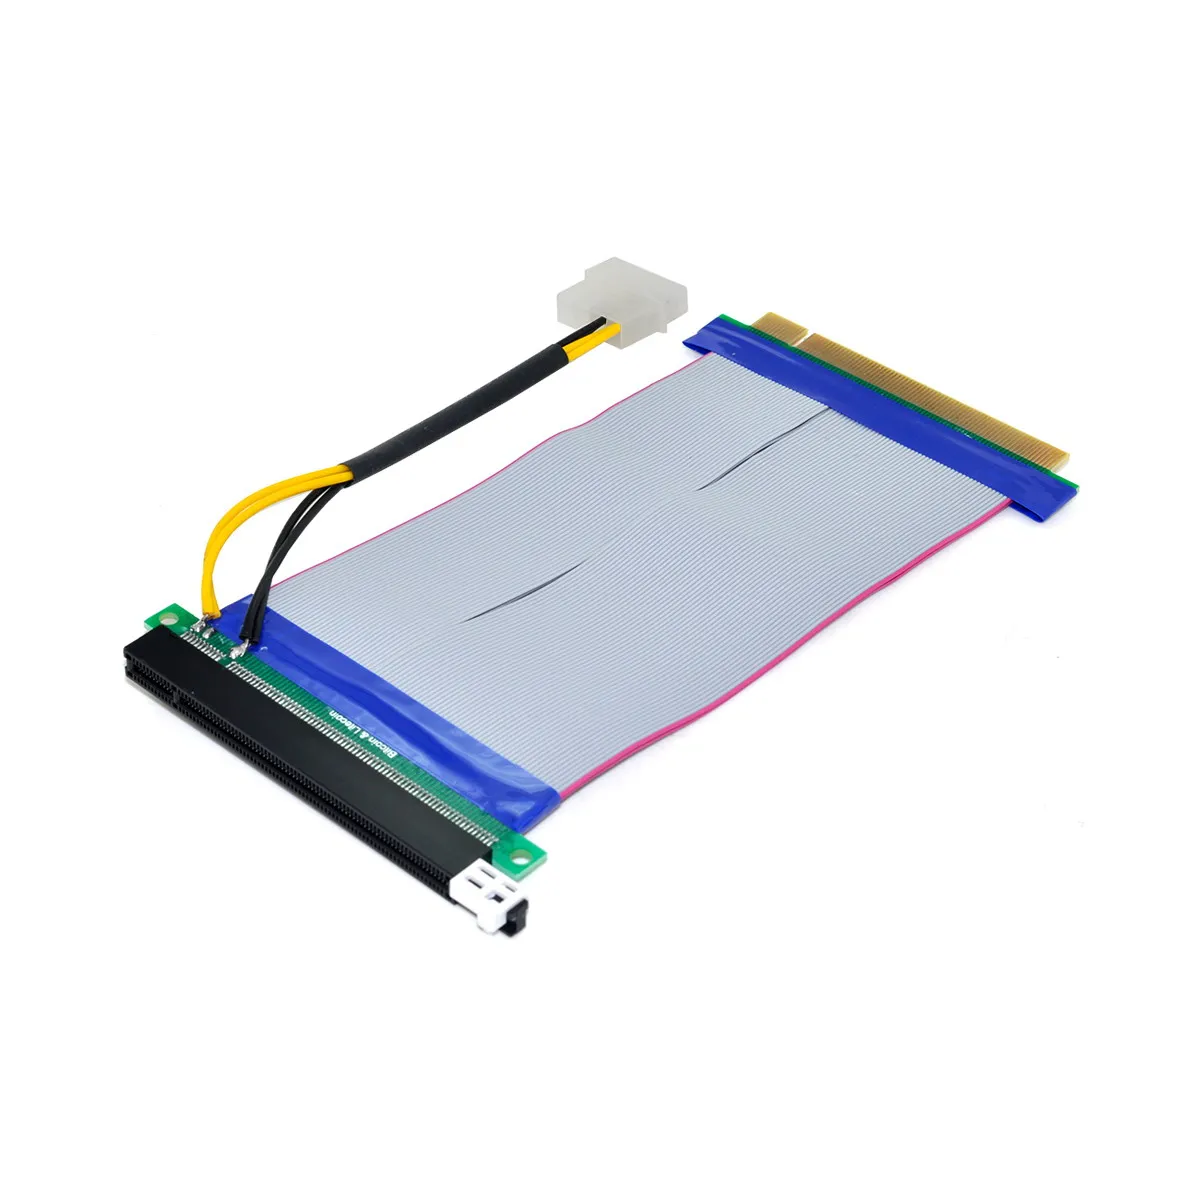 

Chenyang PCI-E Express 16X to 16x Riser Extender Card with Molex IDE Power & Ribbon Cable 20cm